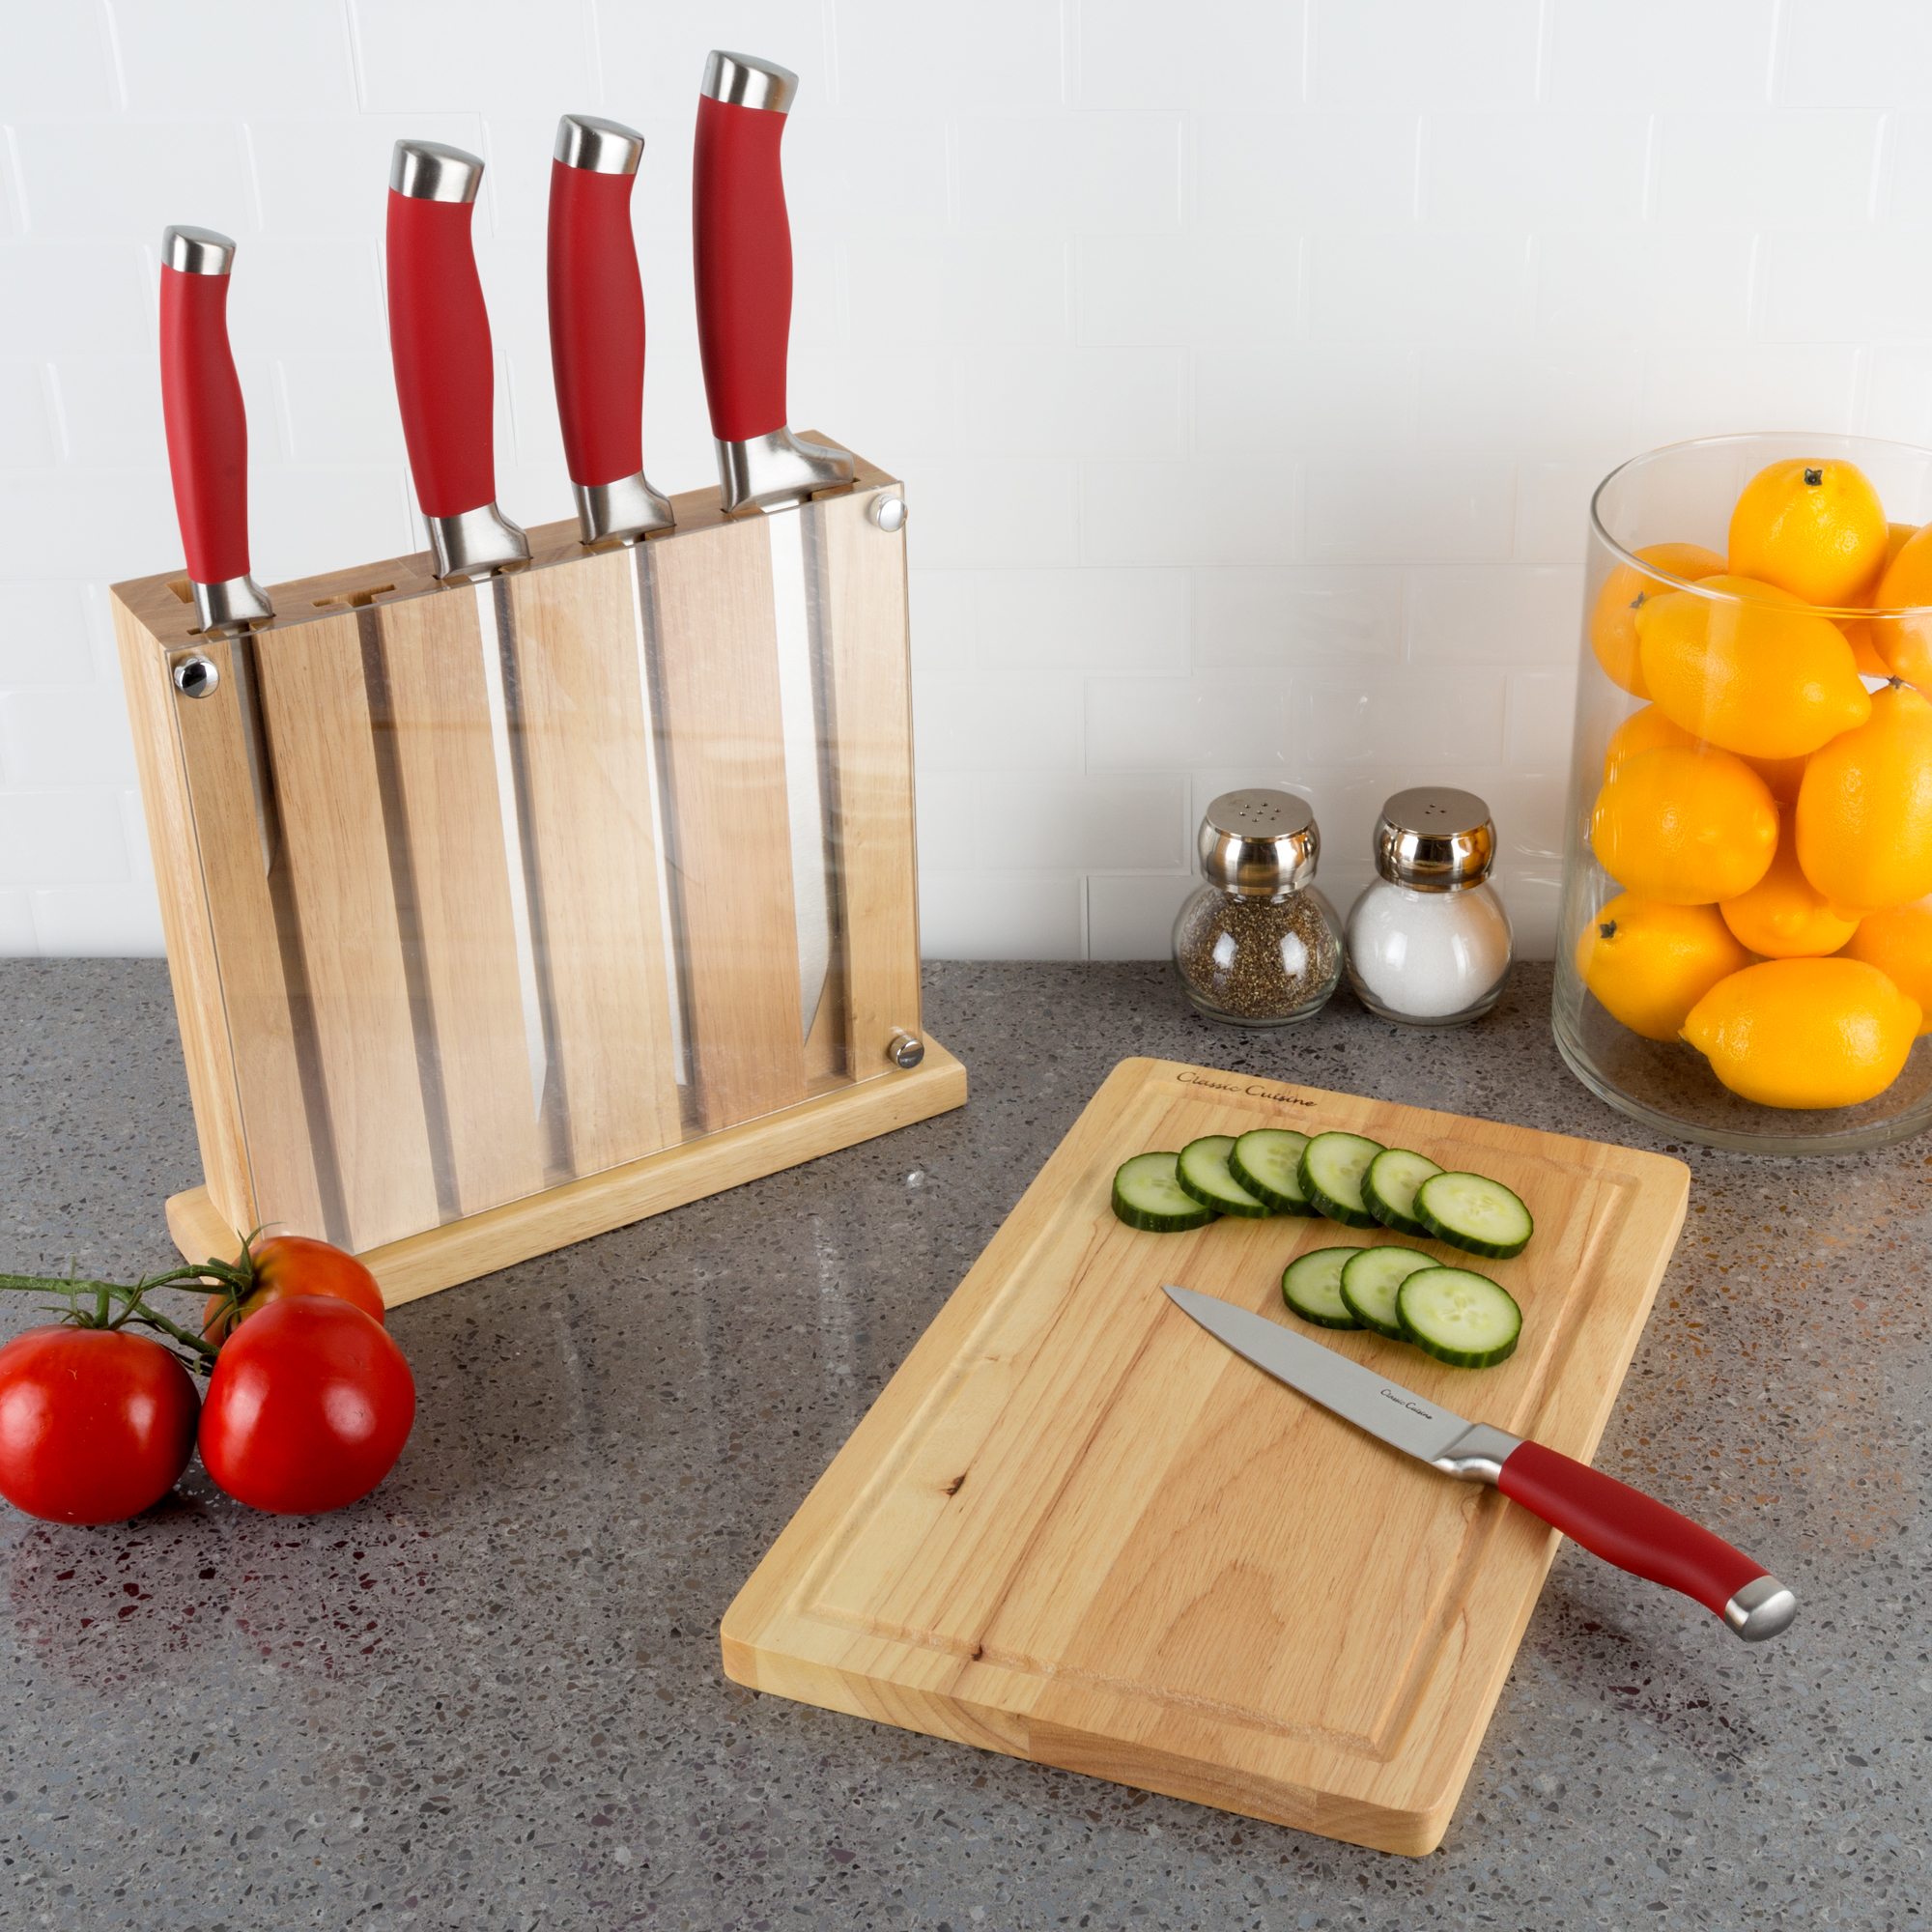 Counter Top Professional Knife Block Set with Chef Quality Knives and Cutting Board